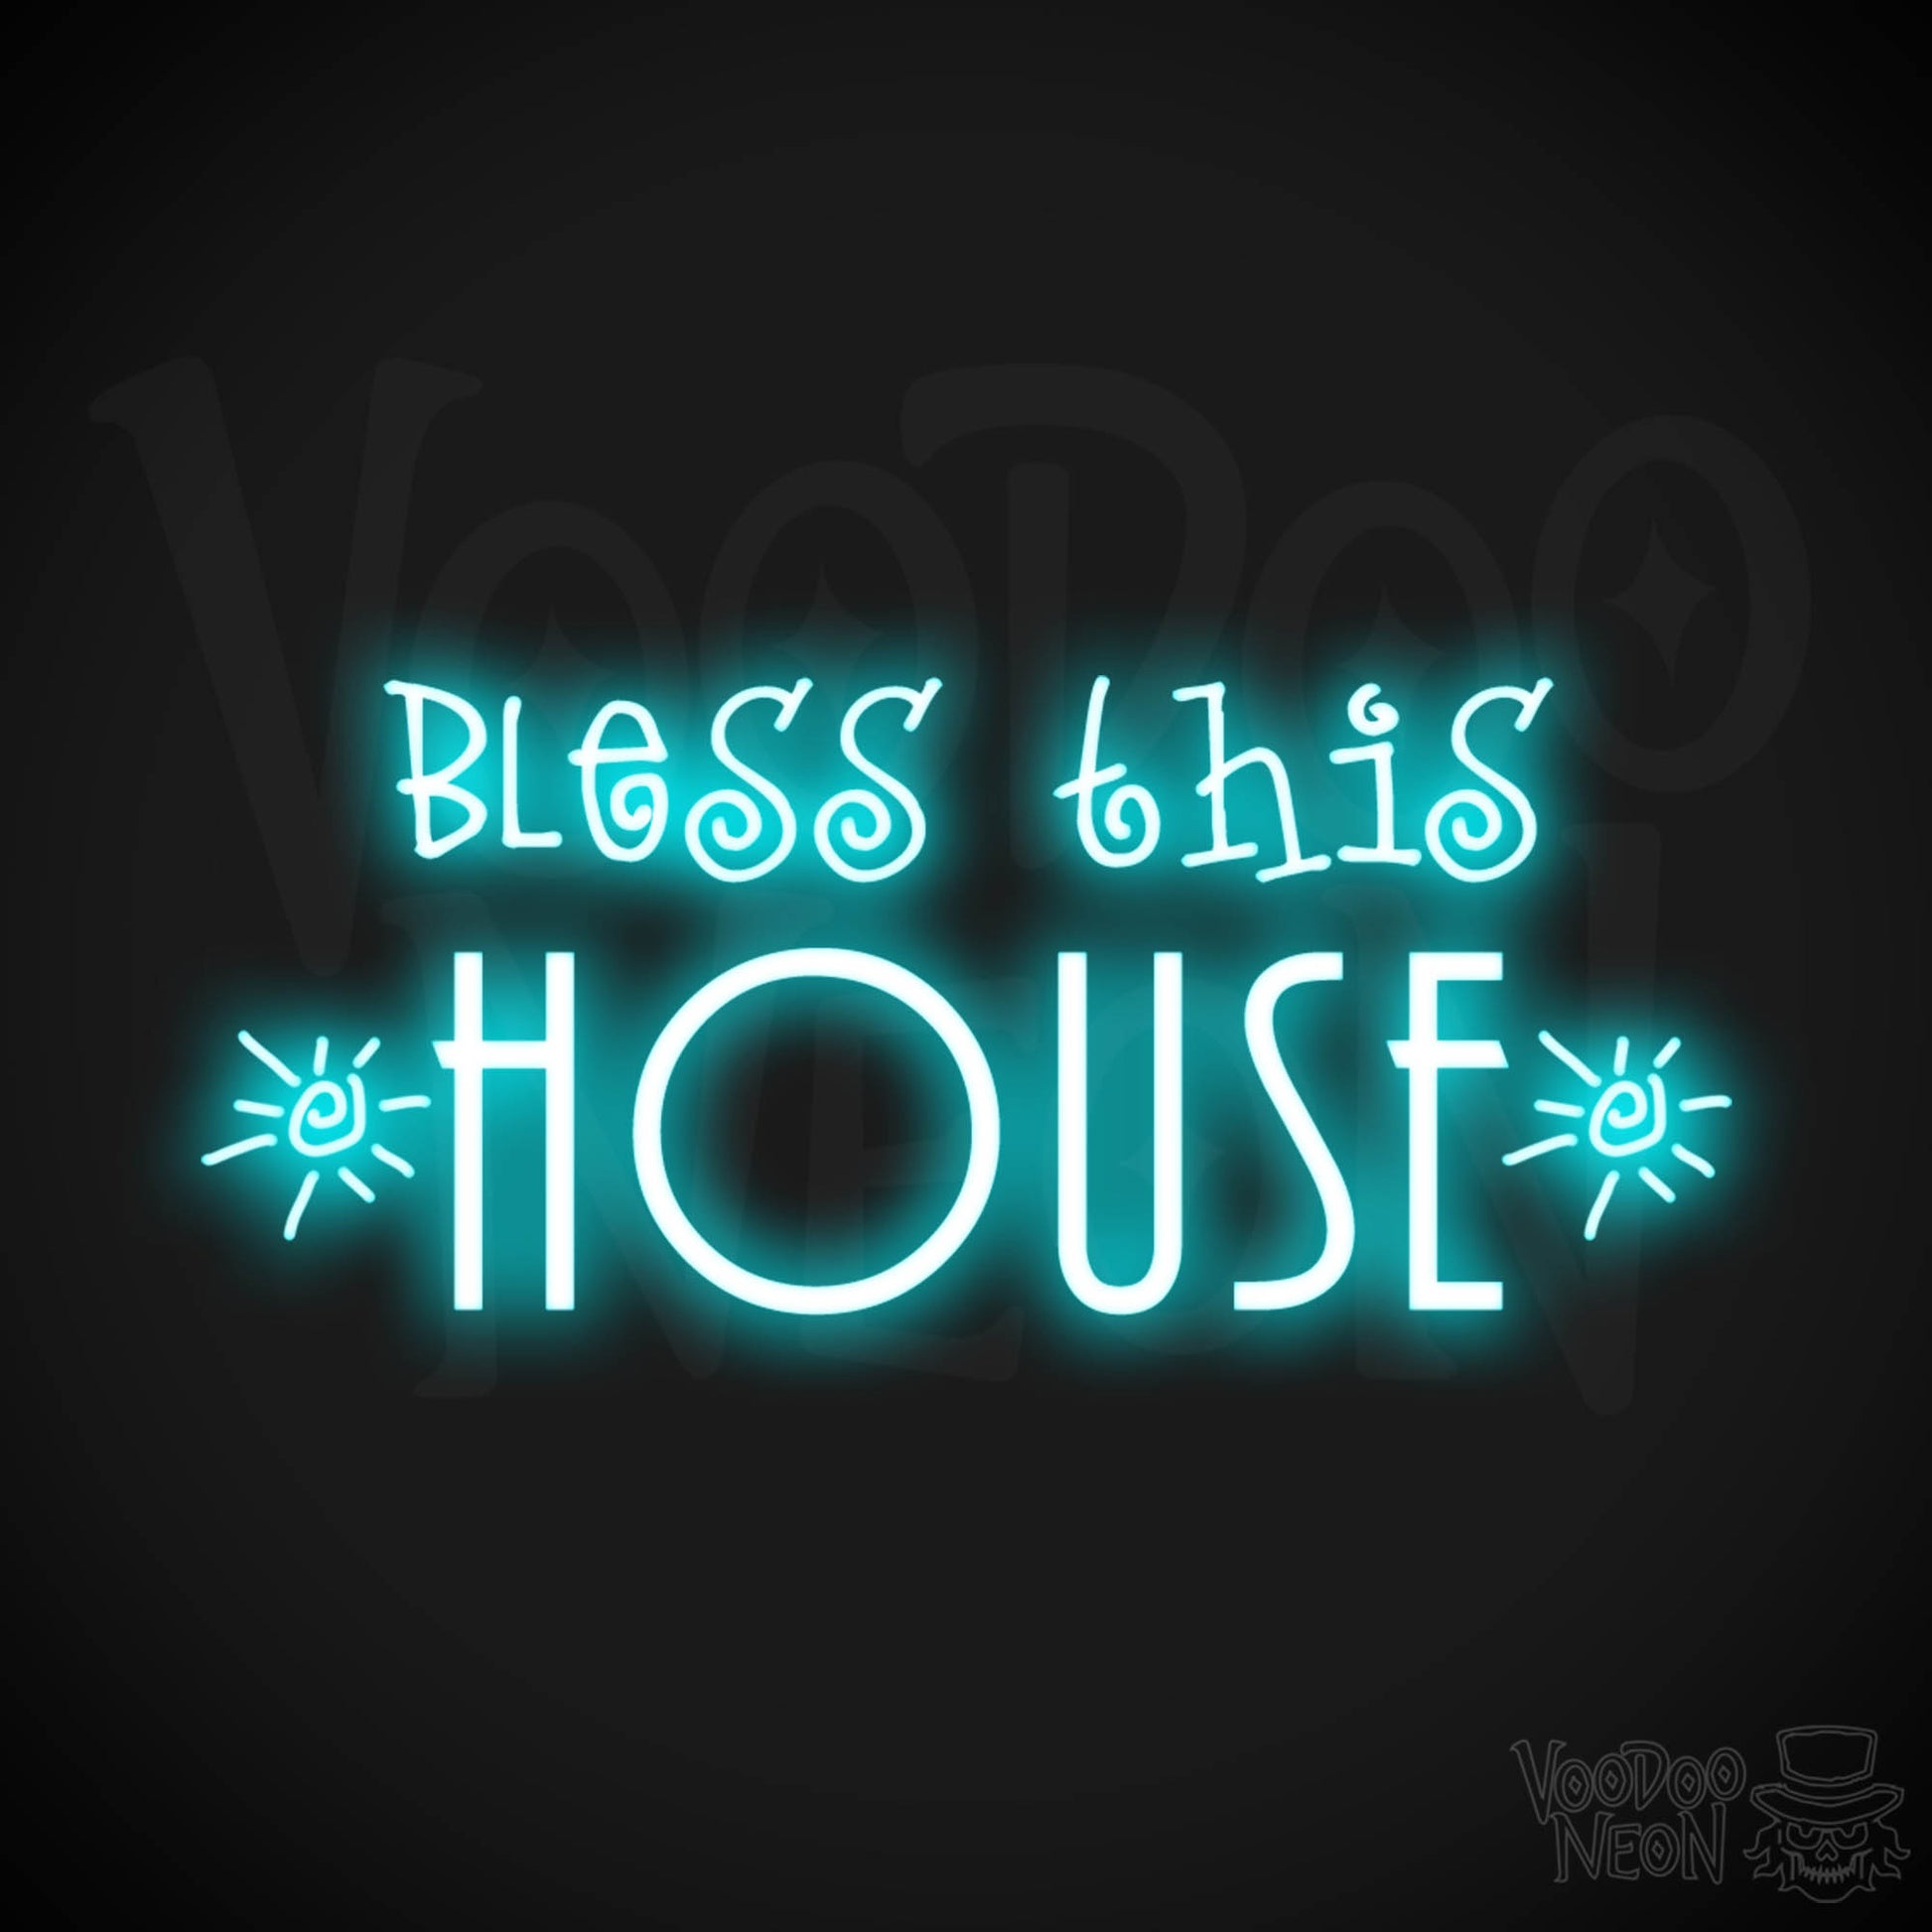 Bless This House Neon Sign - Neon Bless This House Sign - LED Light Up Sign - Color Ice Blue